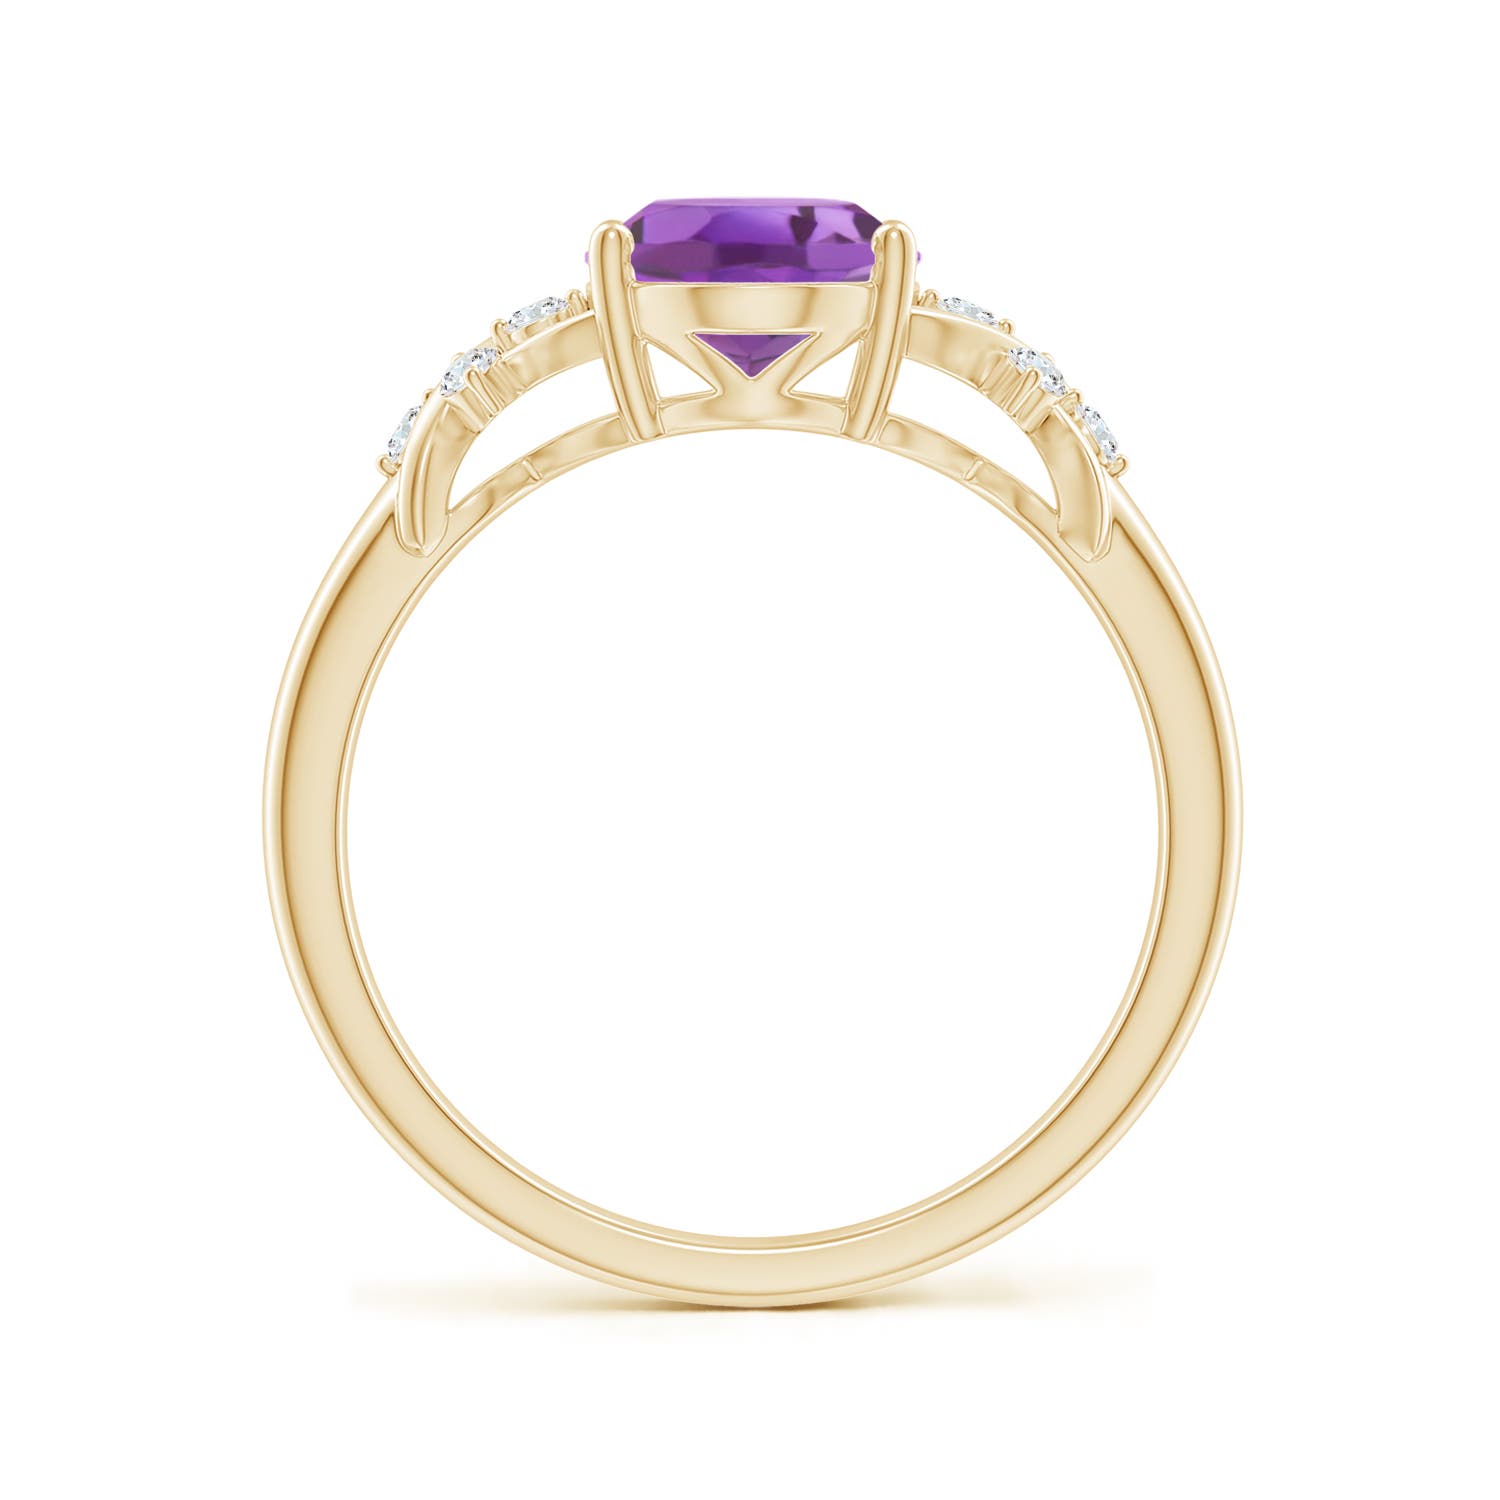 A - Amethyst / 1.71 CT / 14 KT Yellow Gold